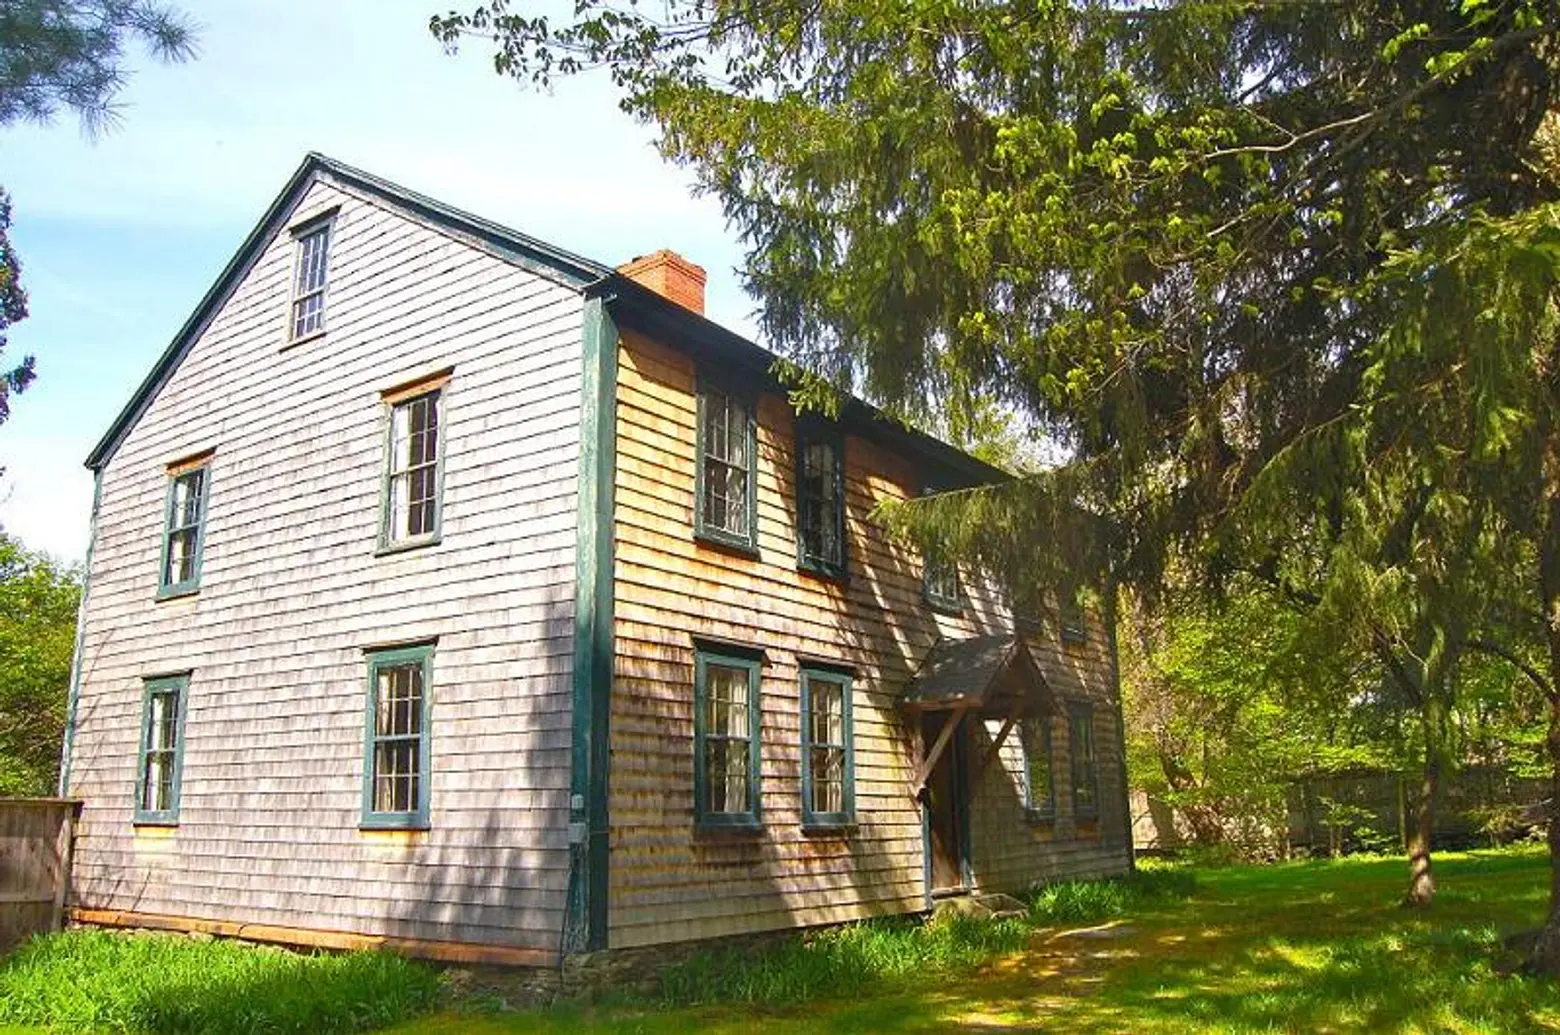 $350K Catskills Colonial Was an Underground Railroad Safe House